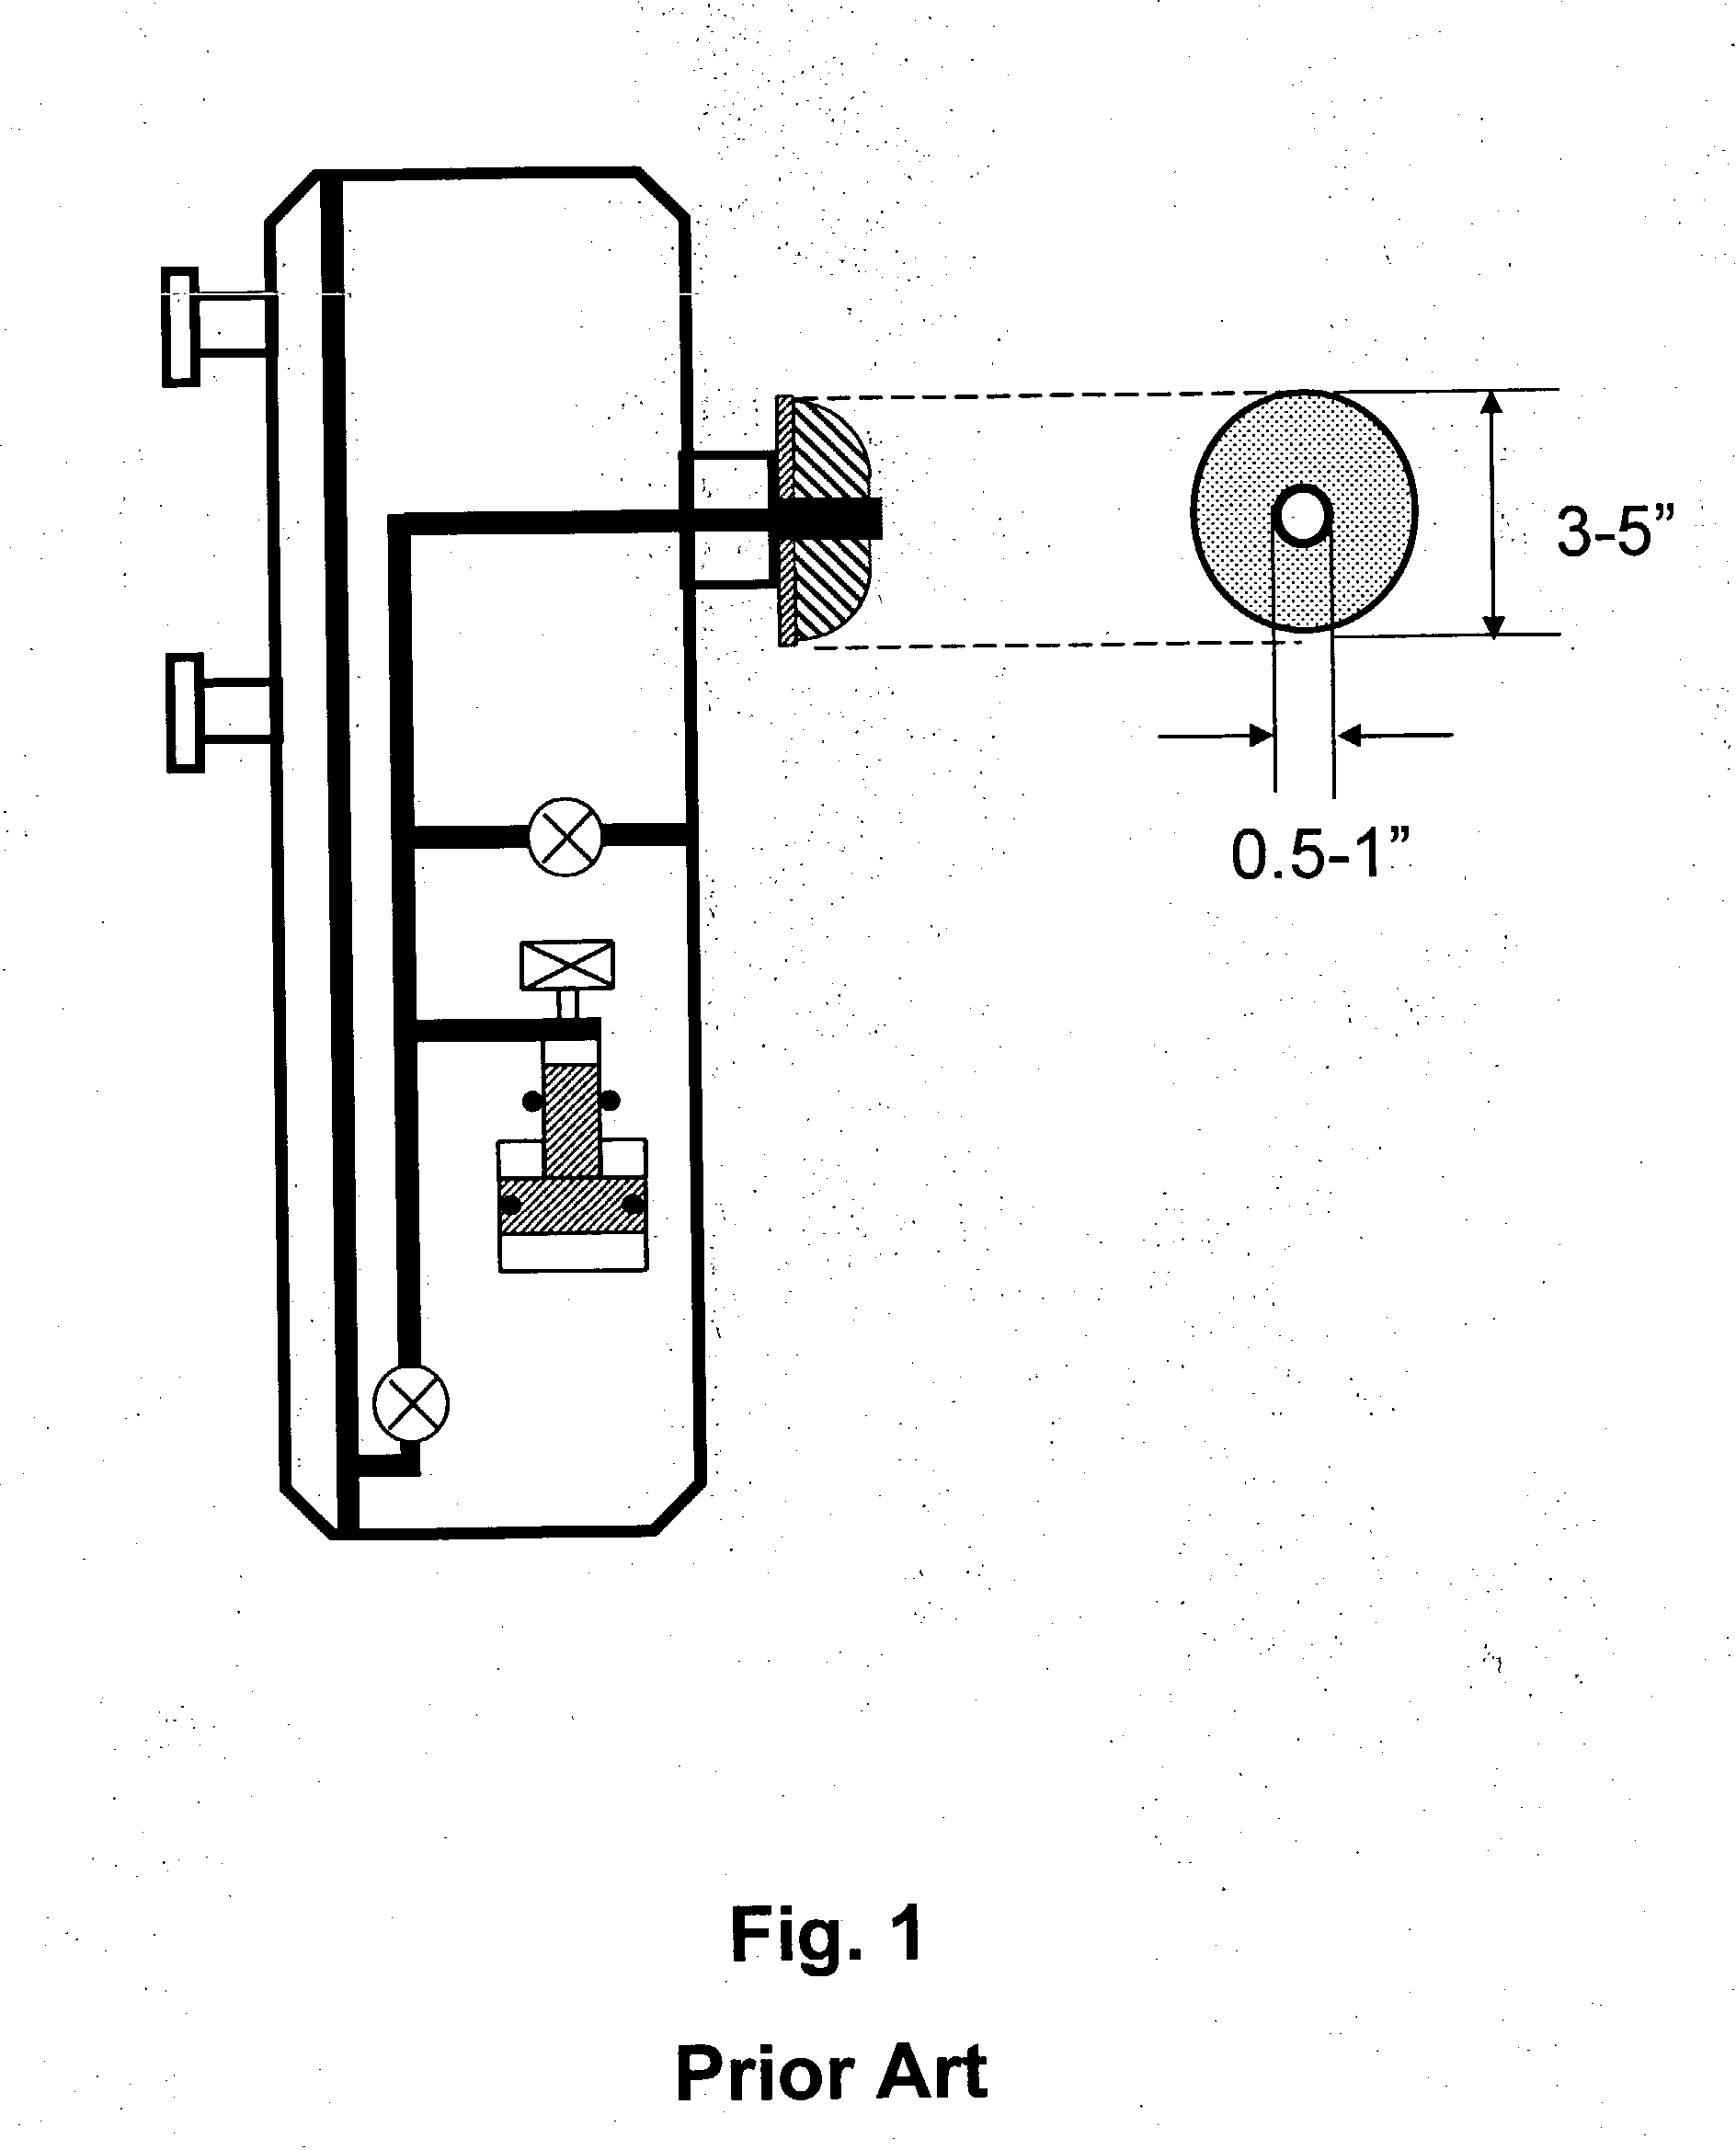 Formation testing and sampling apparatus and methods